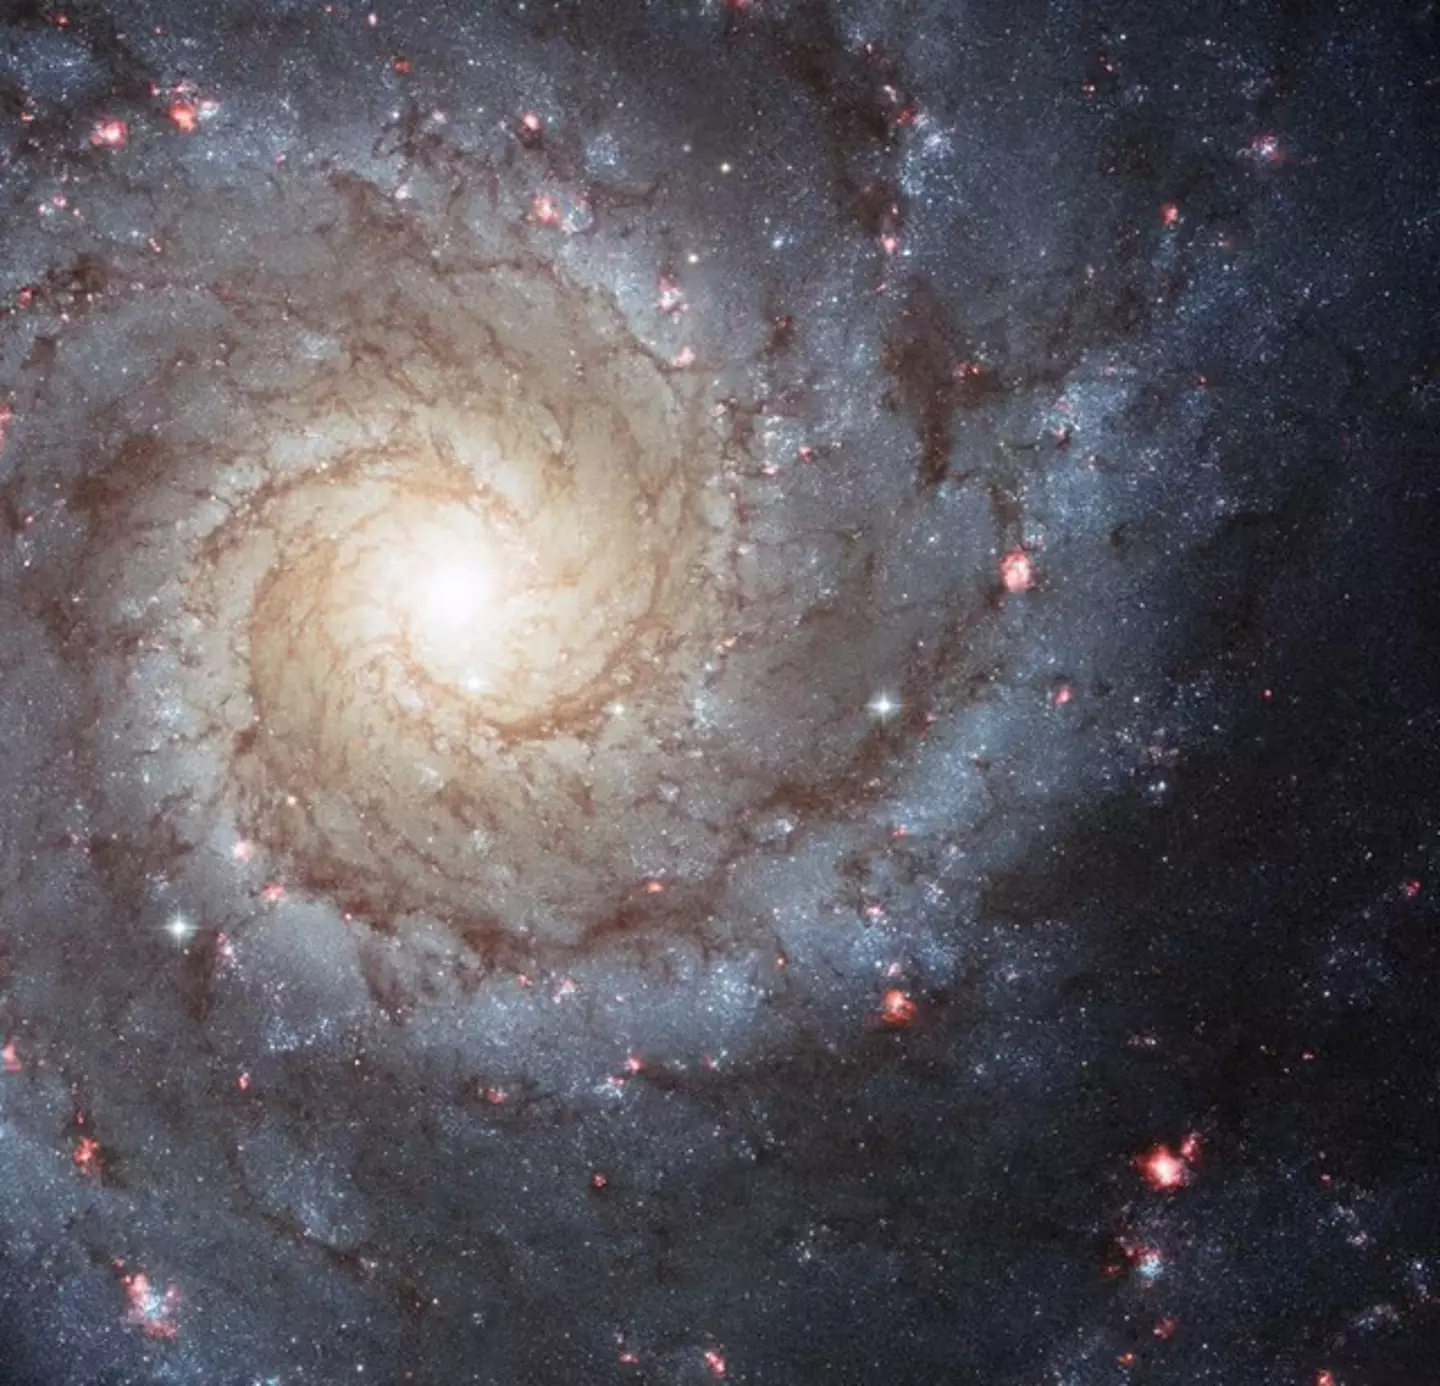 A Hubble Space Telescope image of the spiral galaxy NGC 628.